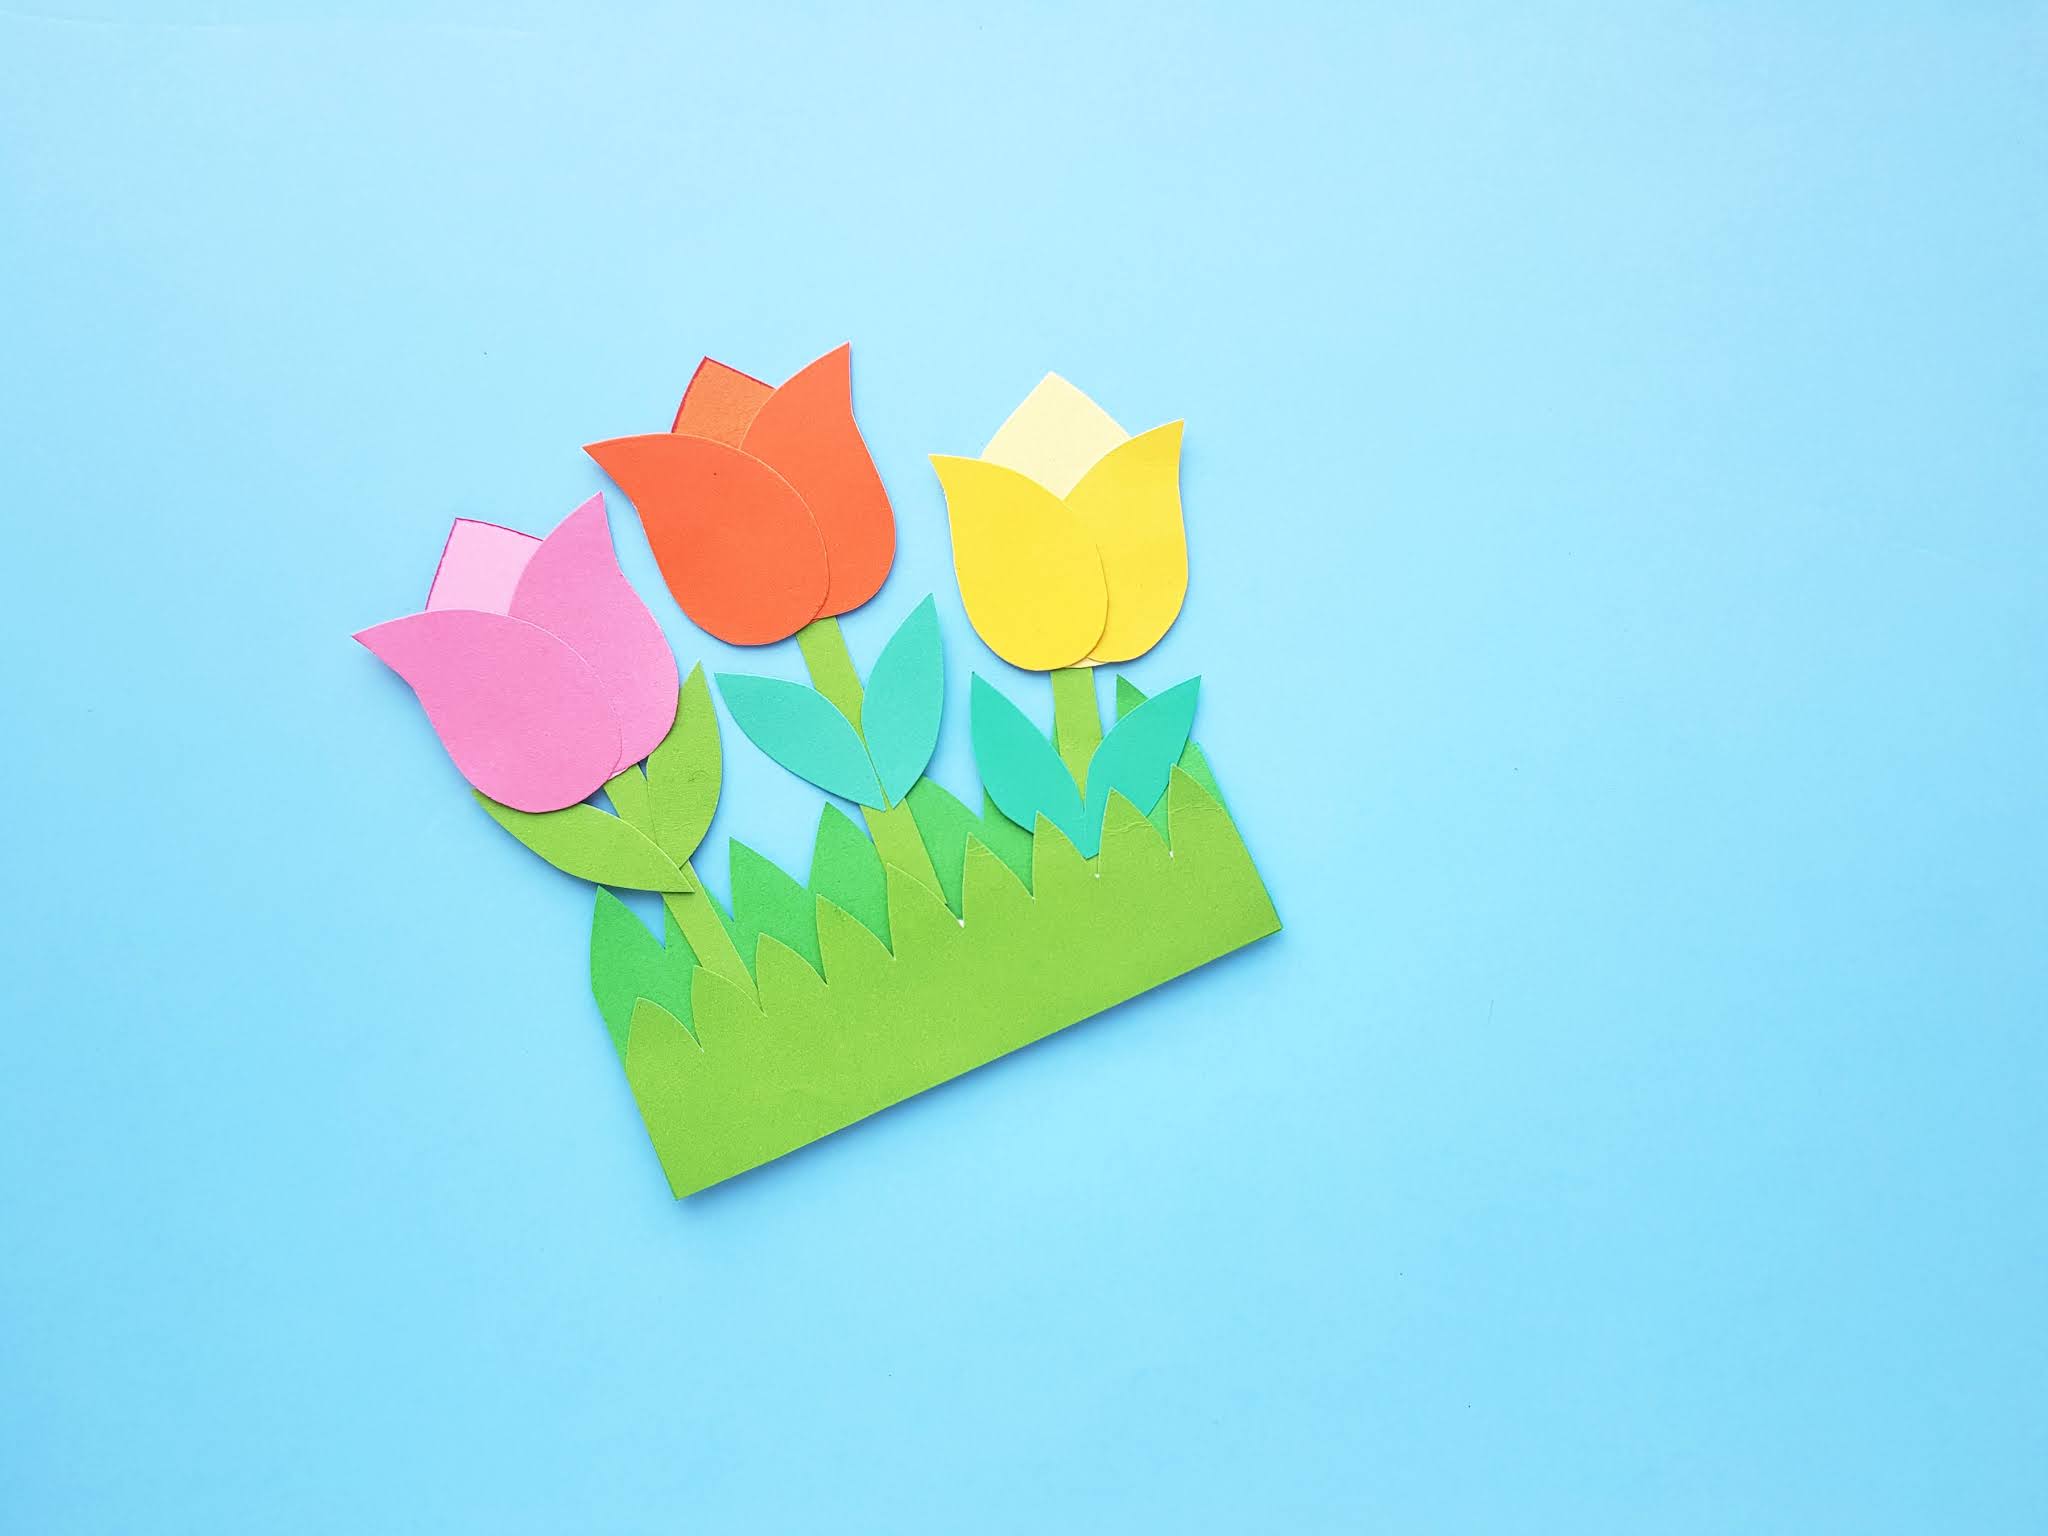 Grass and Flowers Printable Mobile Craft